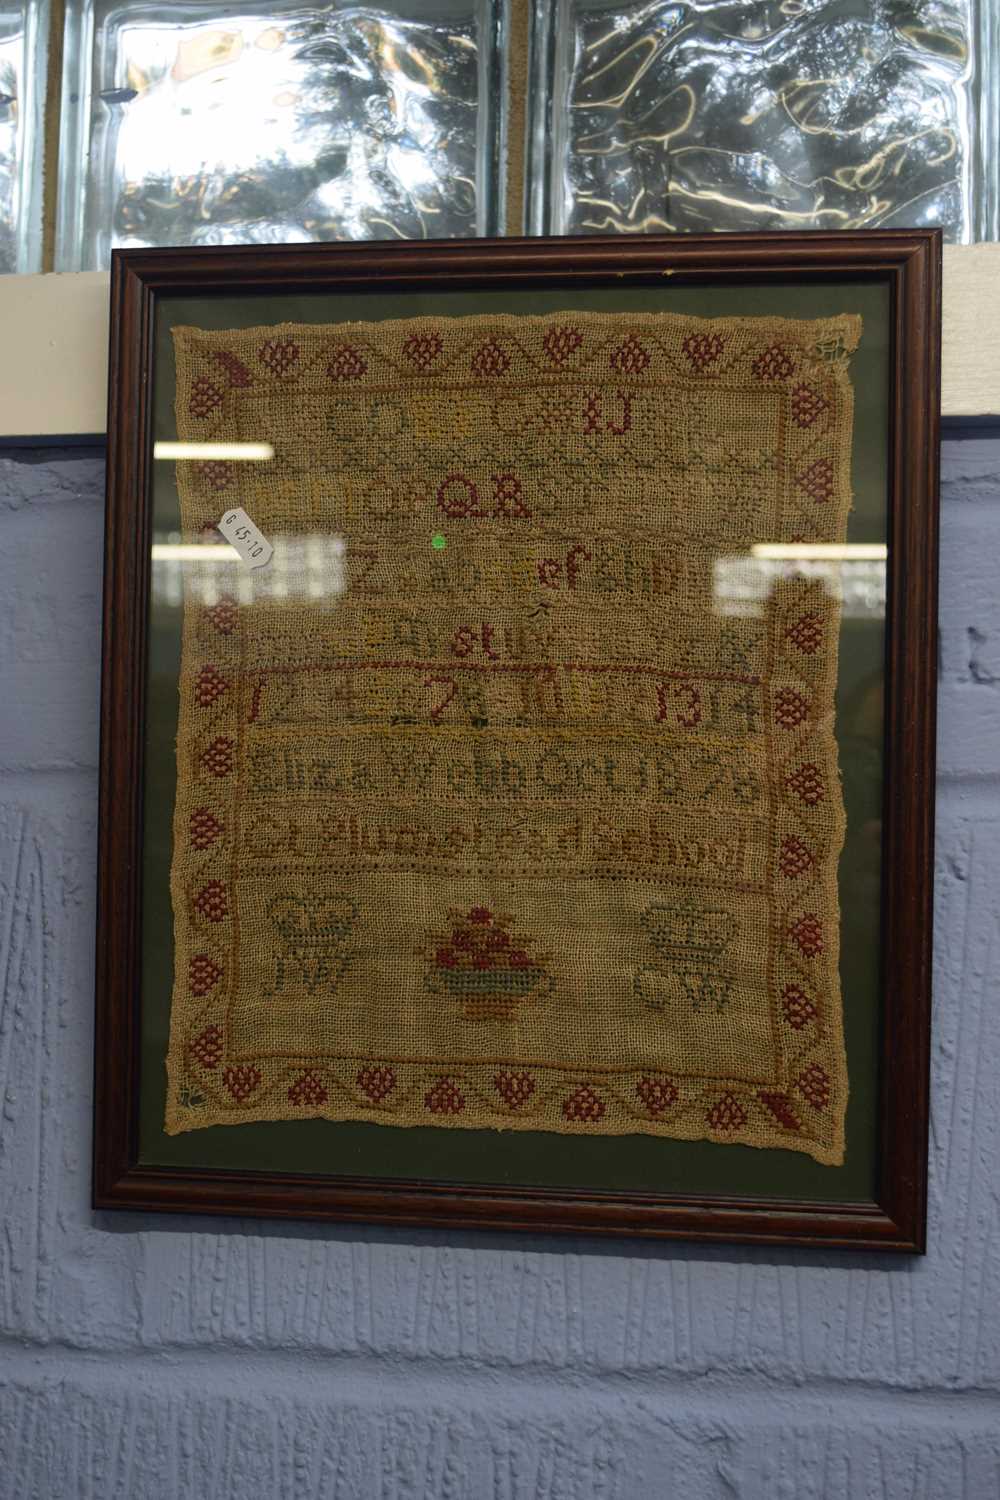 19th century needlework sampler decorated with rows of numbres and letters, signed 'Liza Webb,